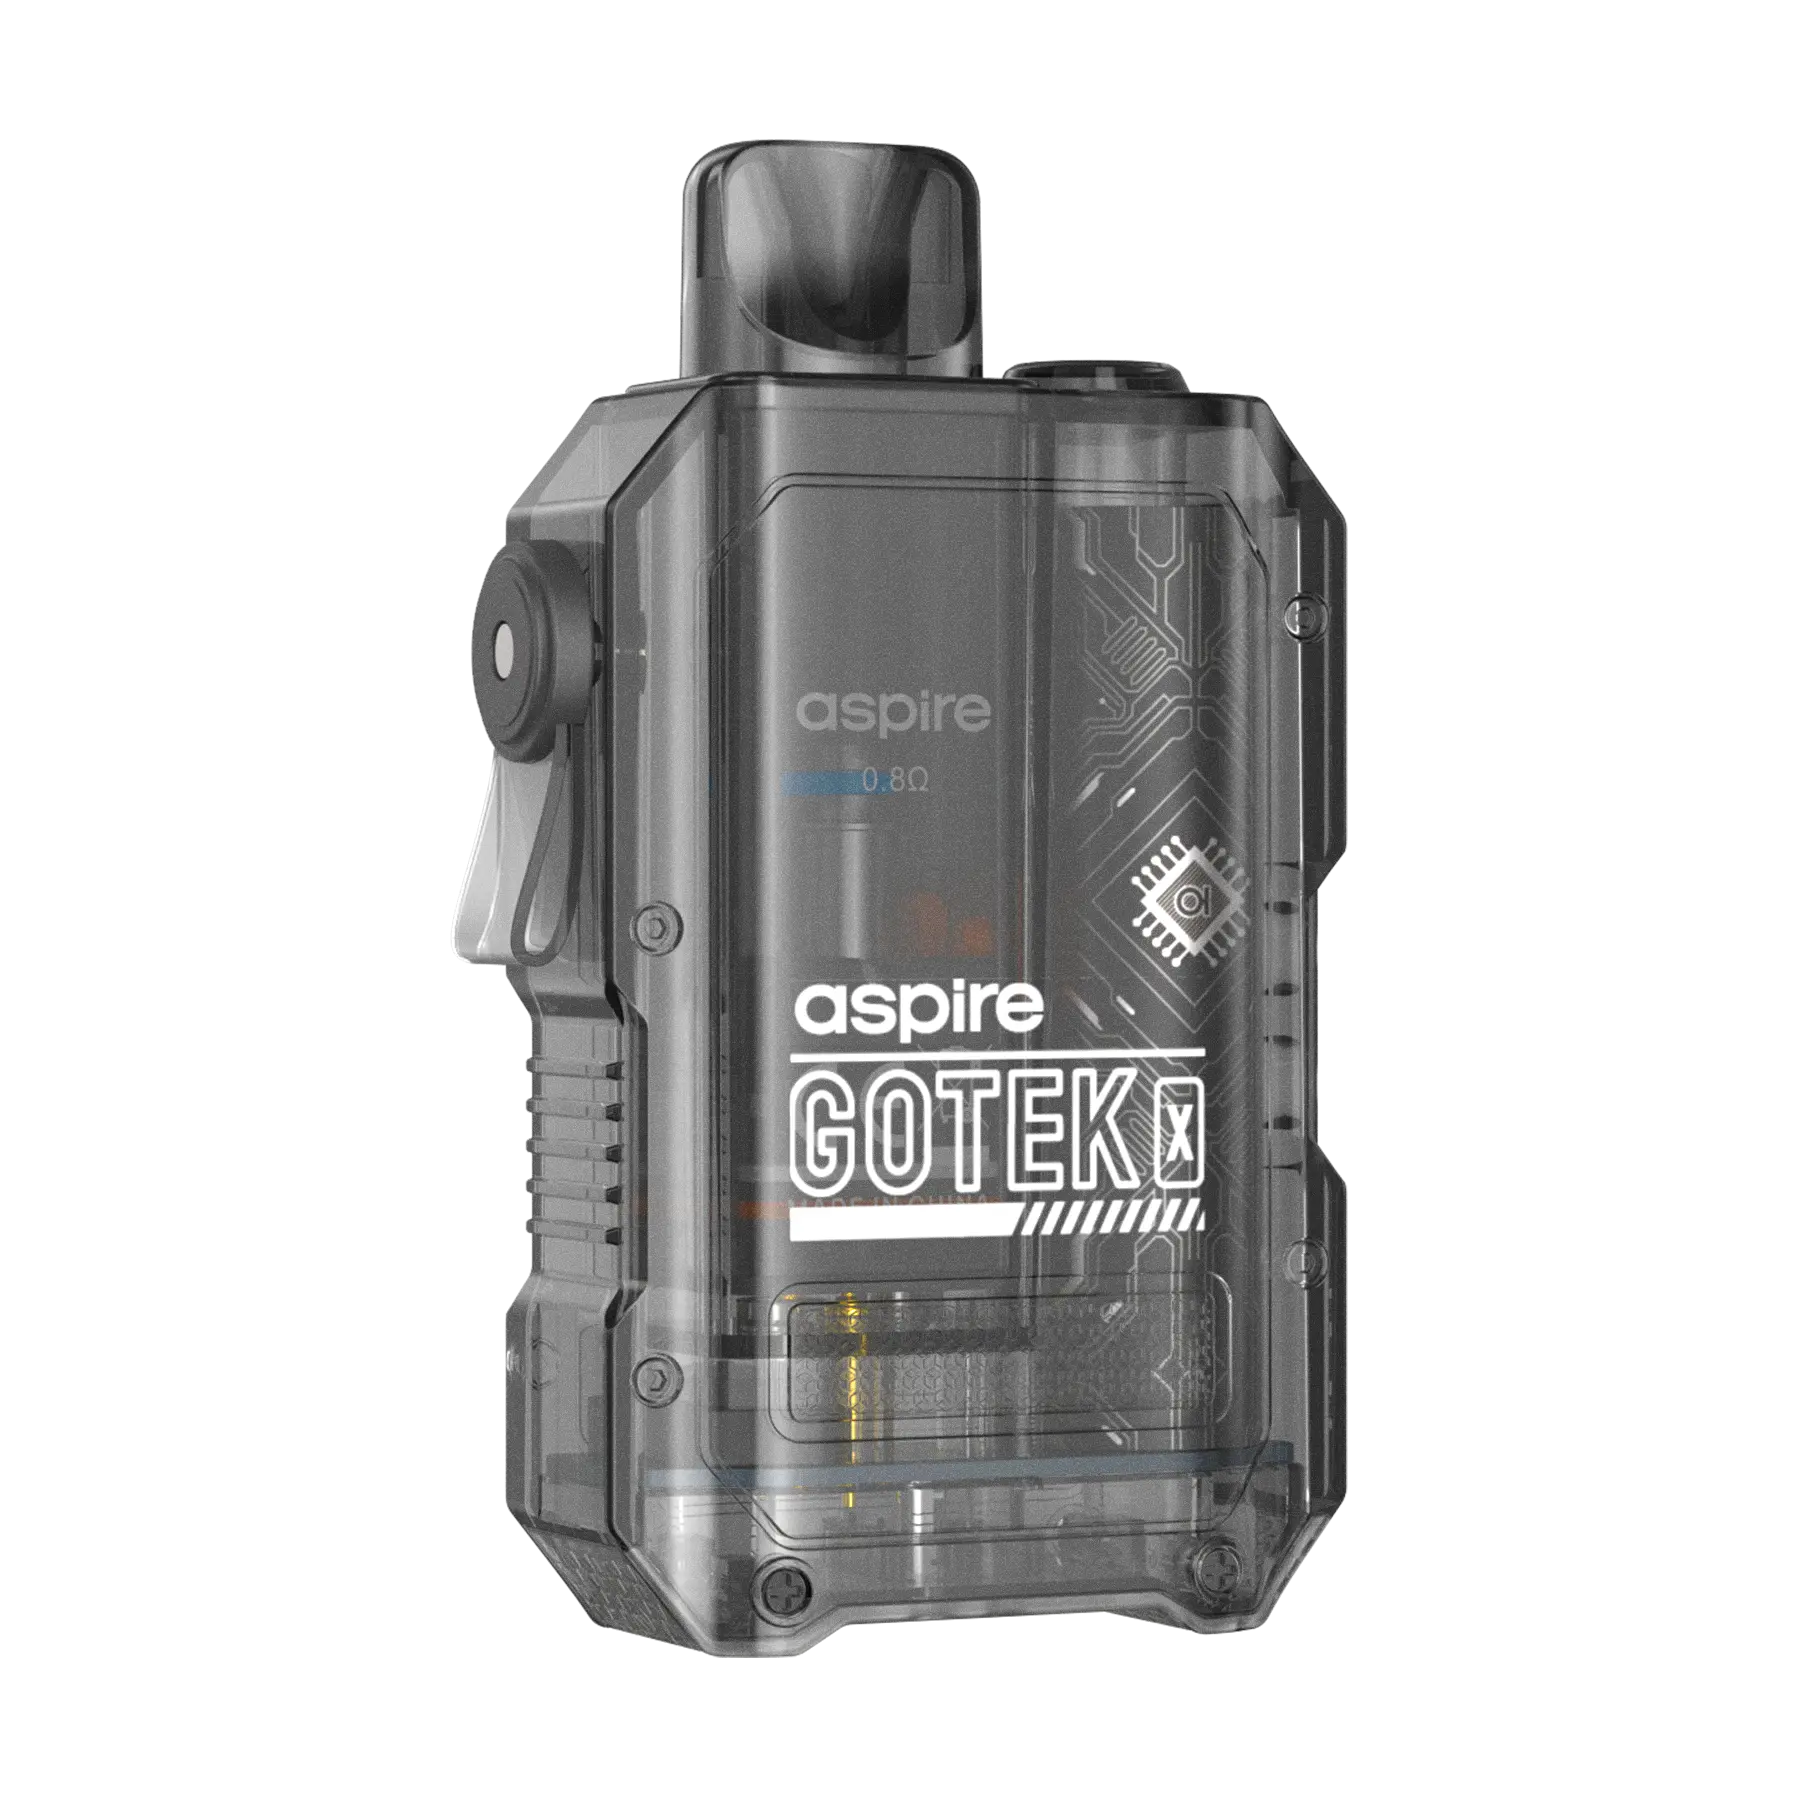 Gotek X’s translucent body creates a futuristic and industrial design that is remarkable for its simplicity. What's more, the flavour is on point too!